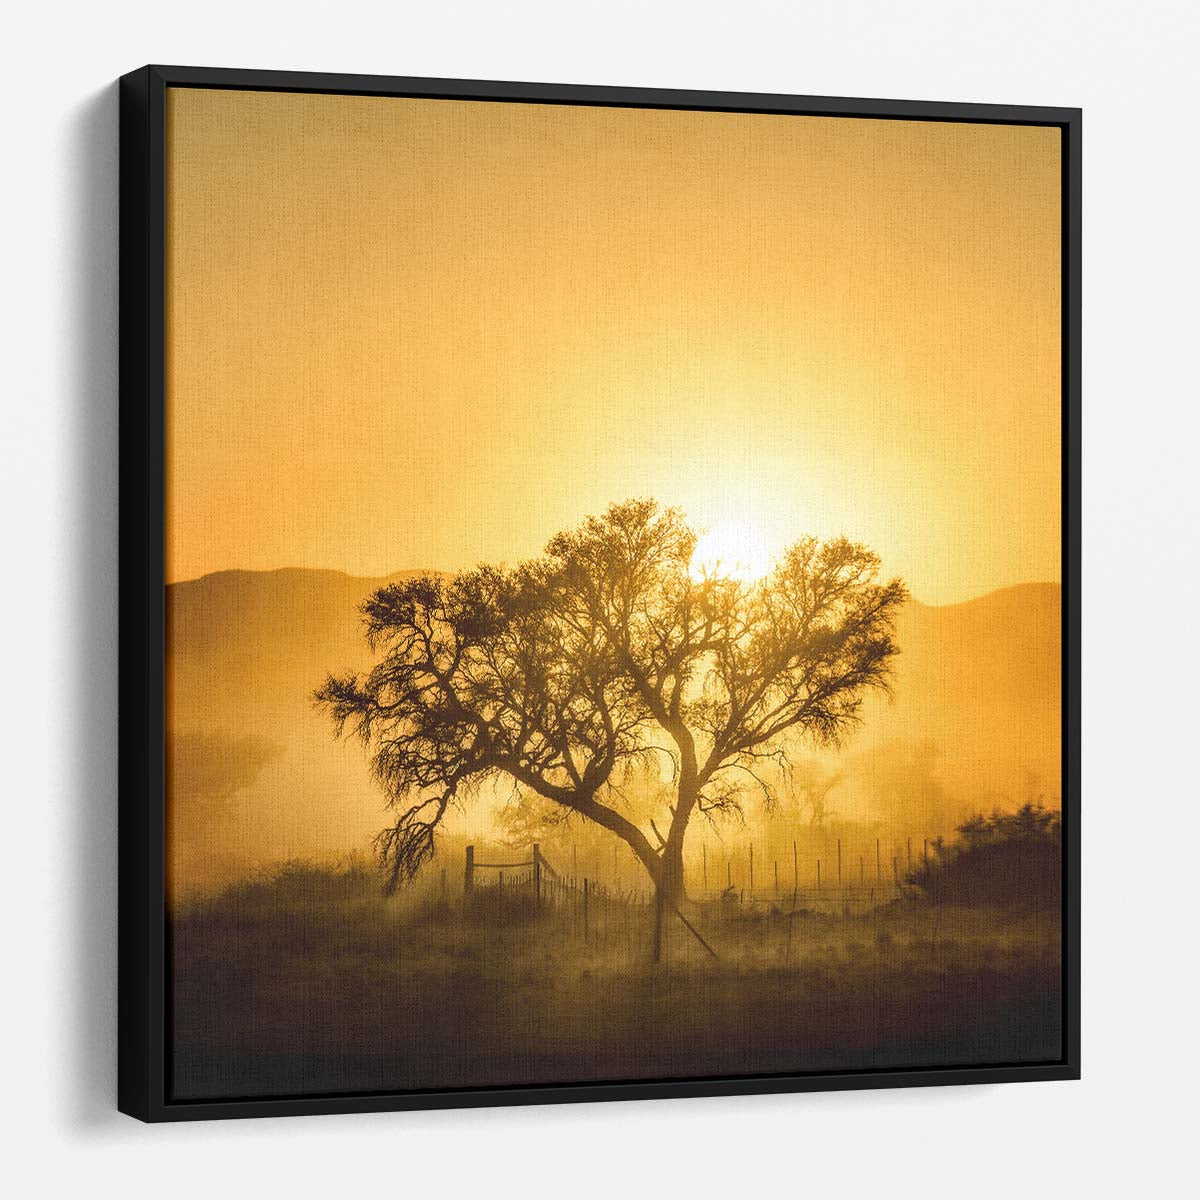 Golden Sunrise Over Namibian Landscape African Dawn Wall Art by Luxuriance Designs. Made in USA.